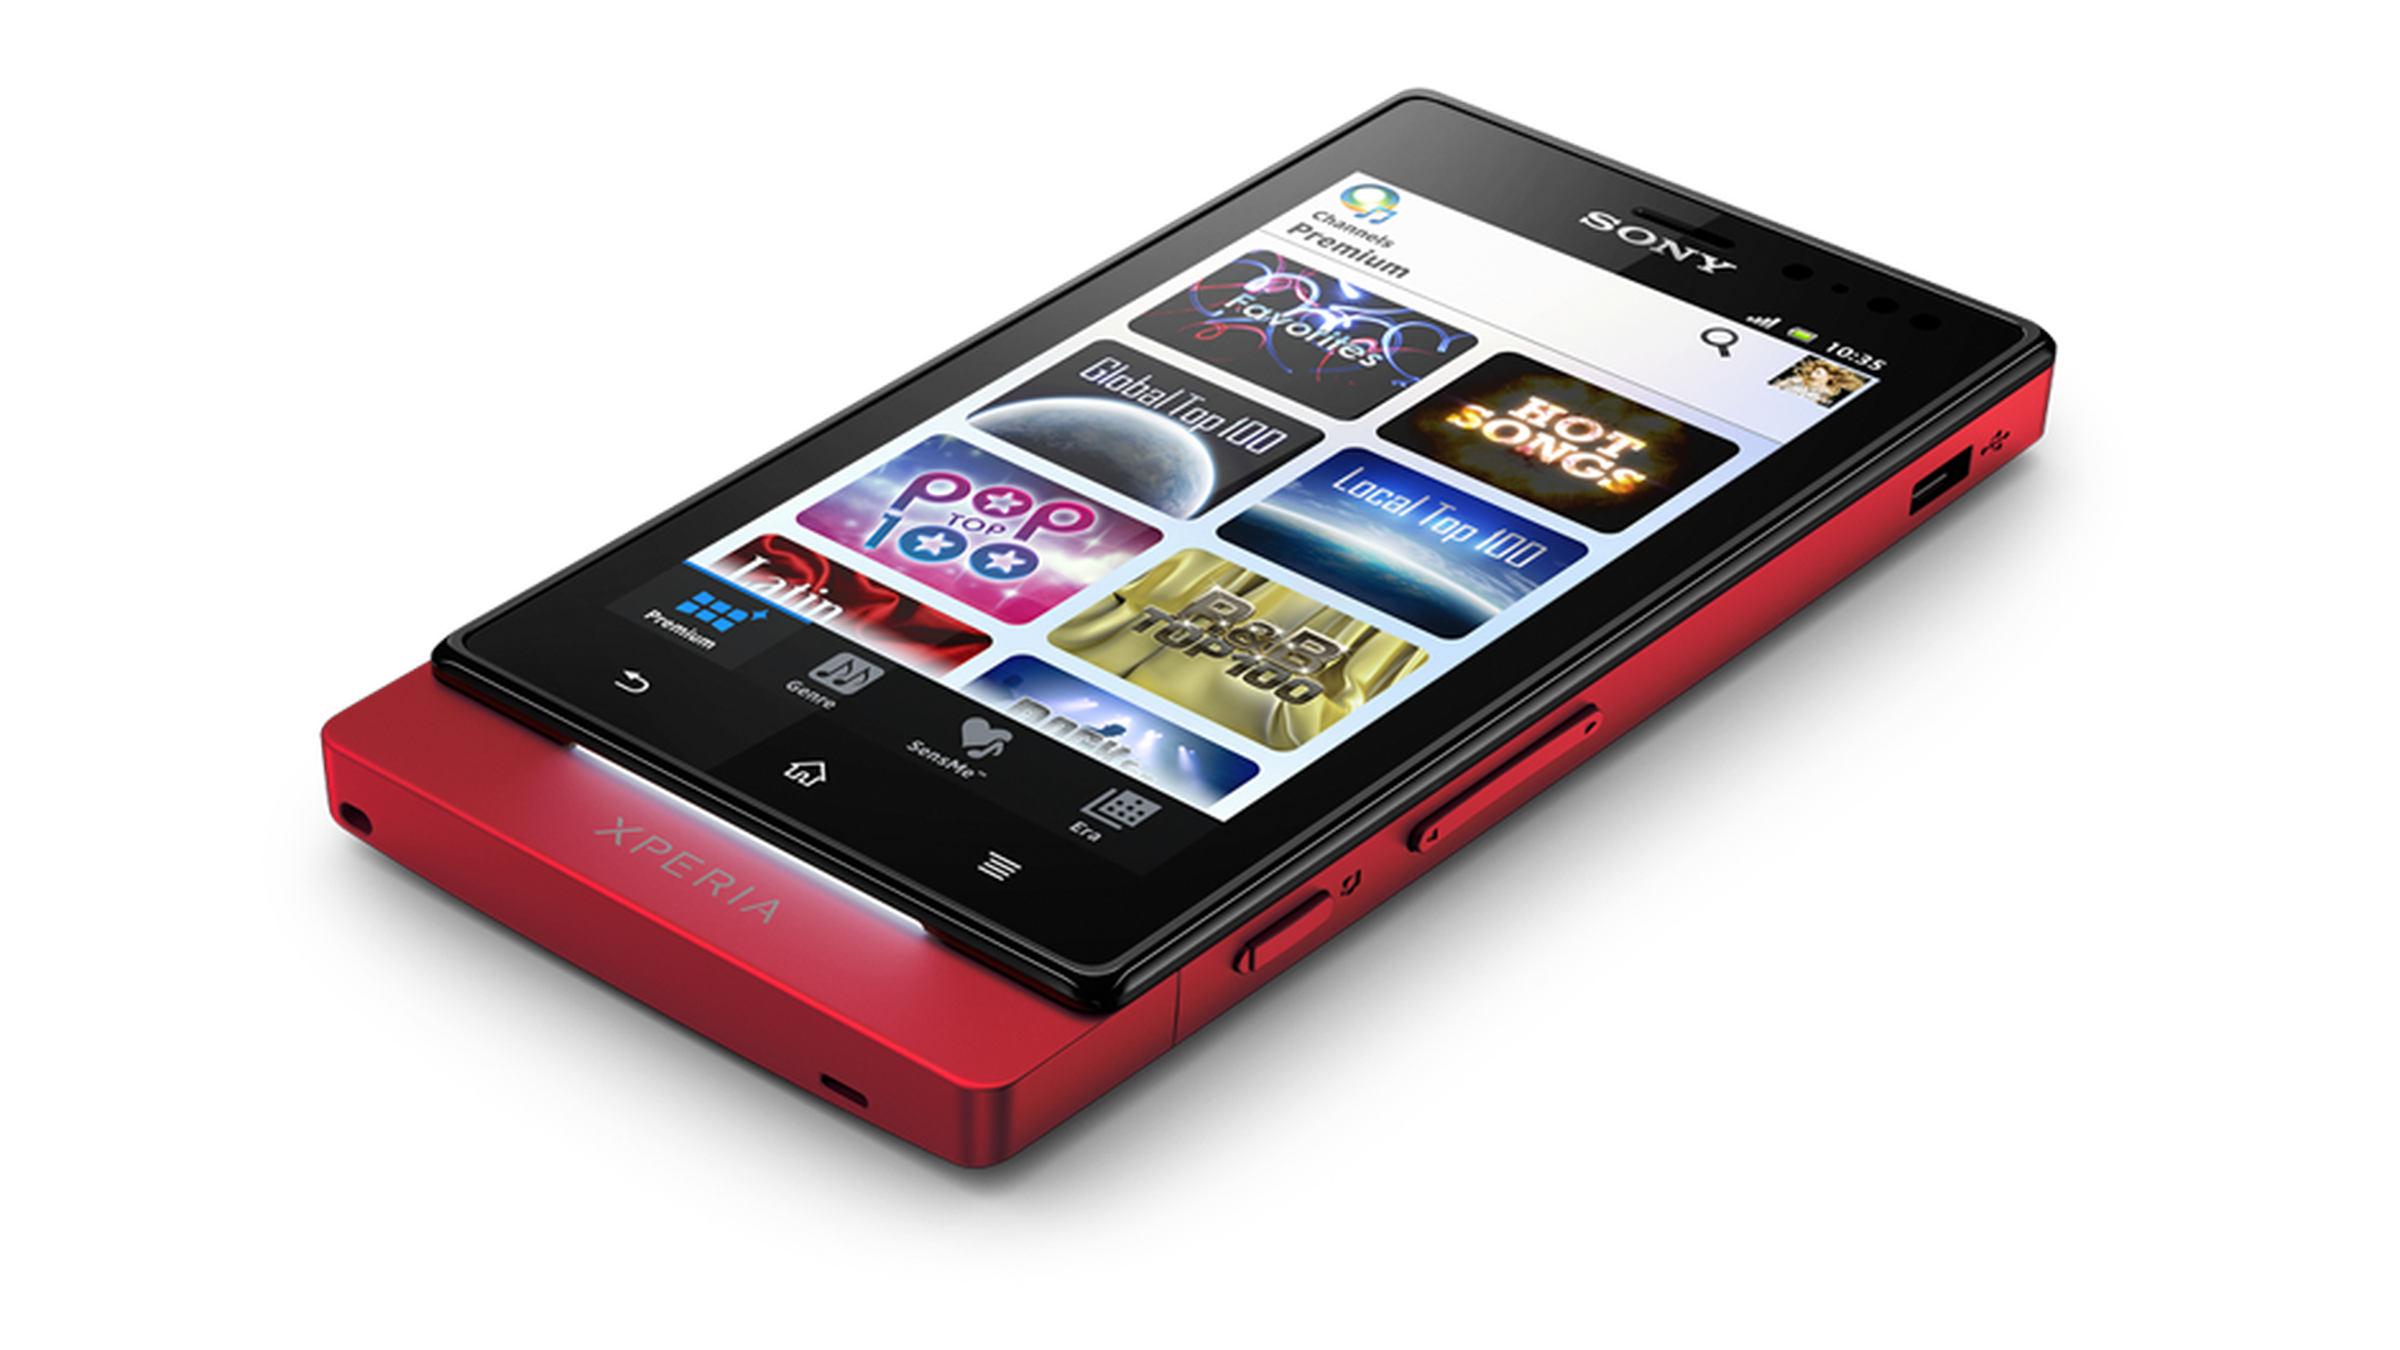 Sony Xperia Sola press images